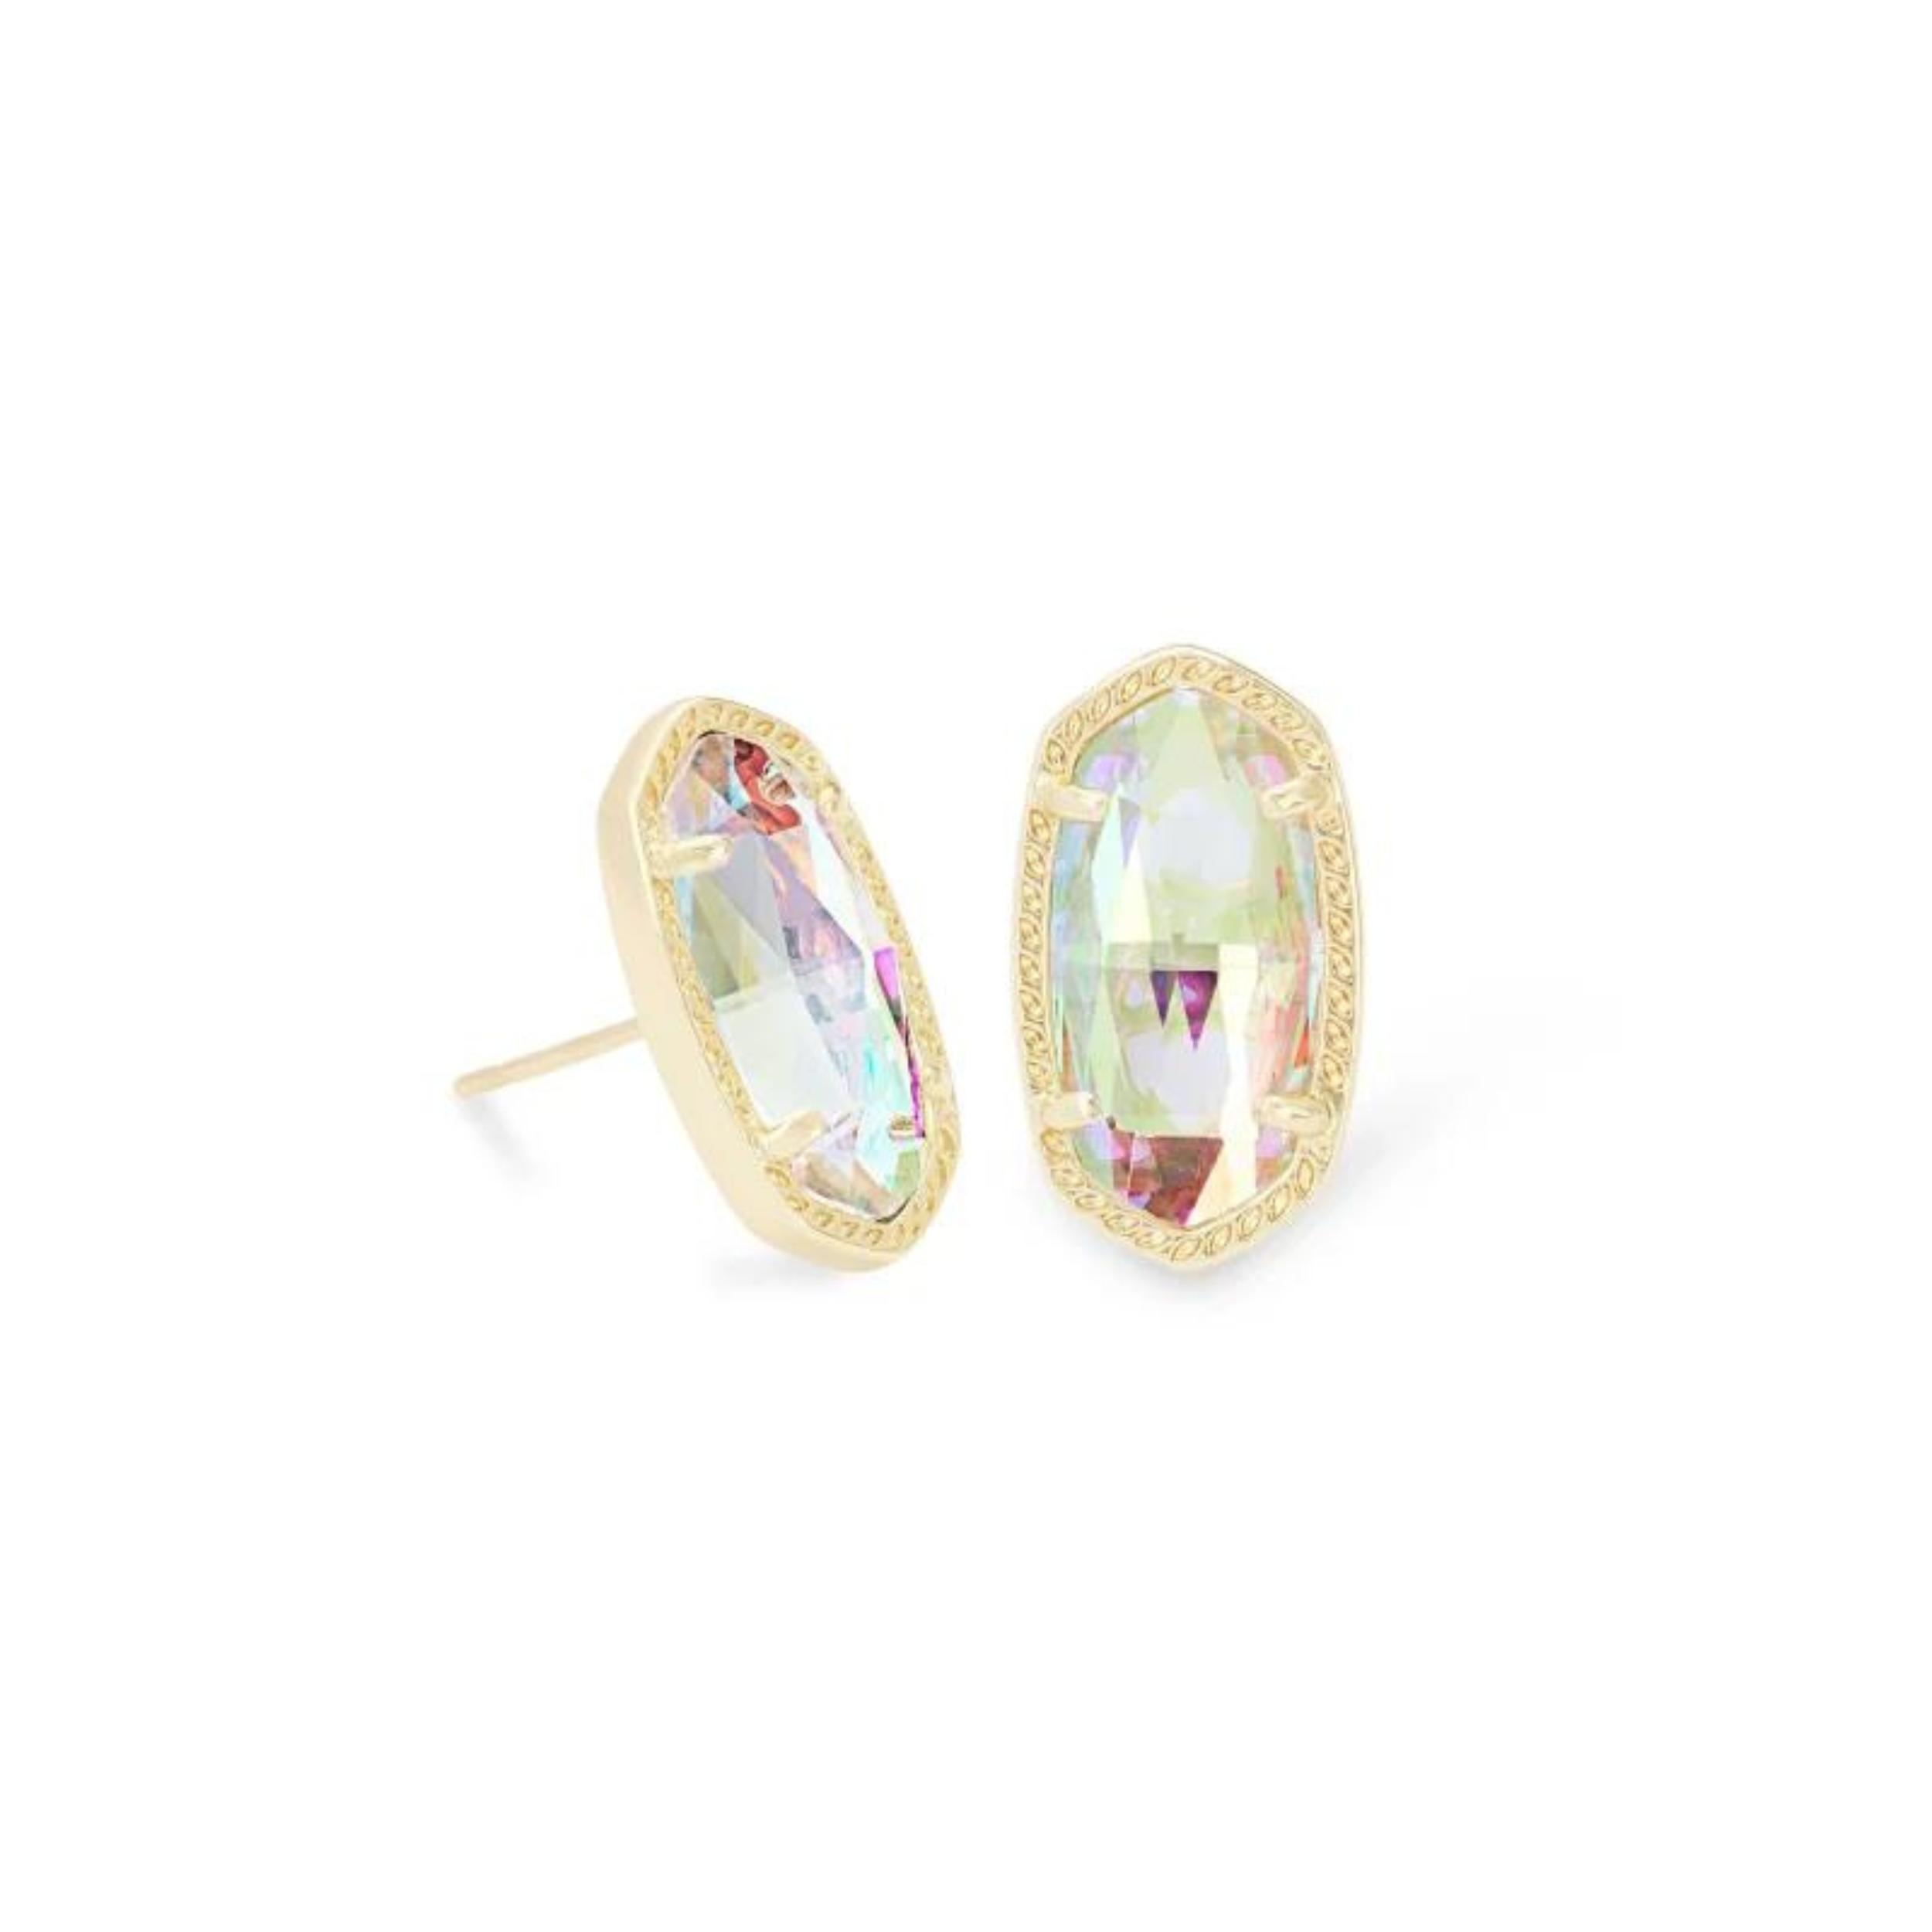 Gold stud earrings with dichoric glass stone, pictured on a white background.